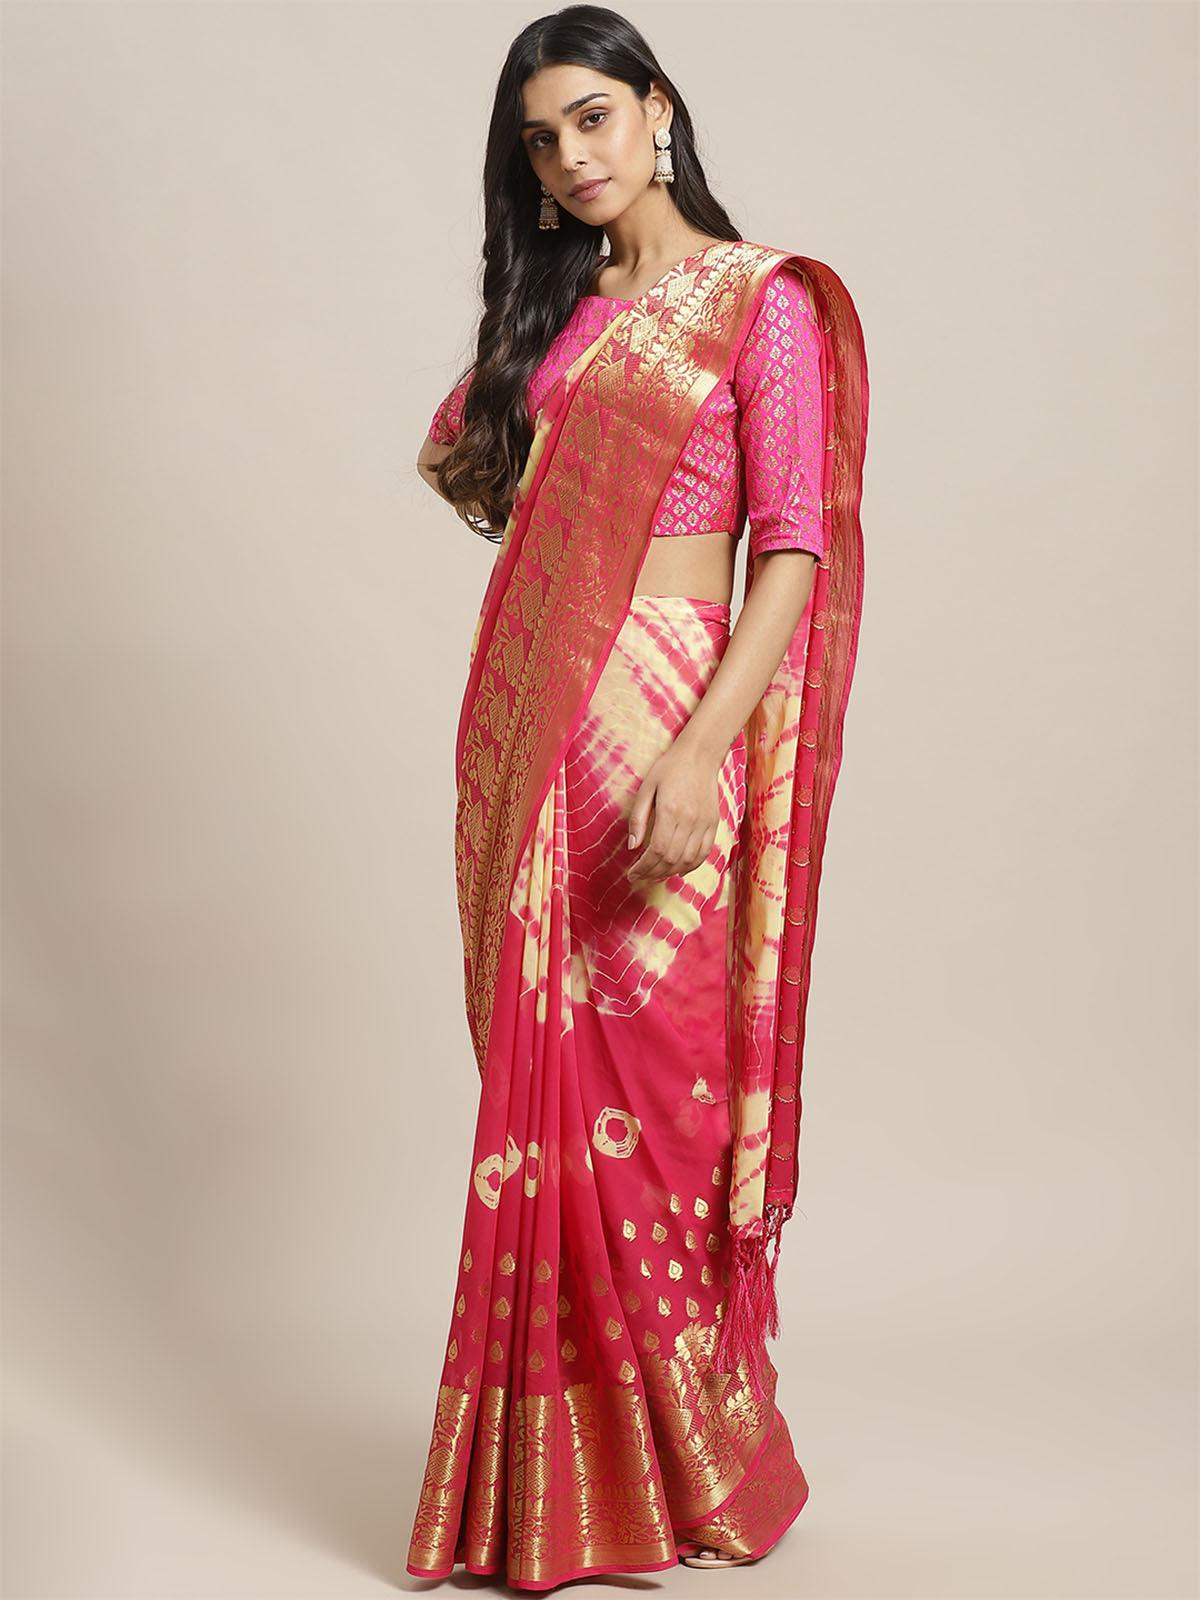 Women's Pink Festive Georgette Woven Saree With Unstitched Blouse - Odette